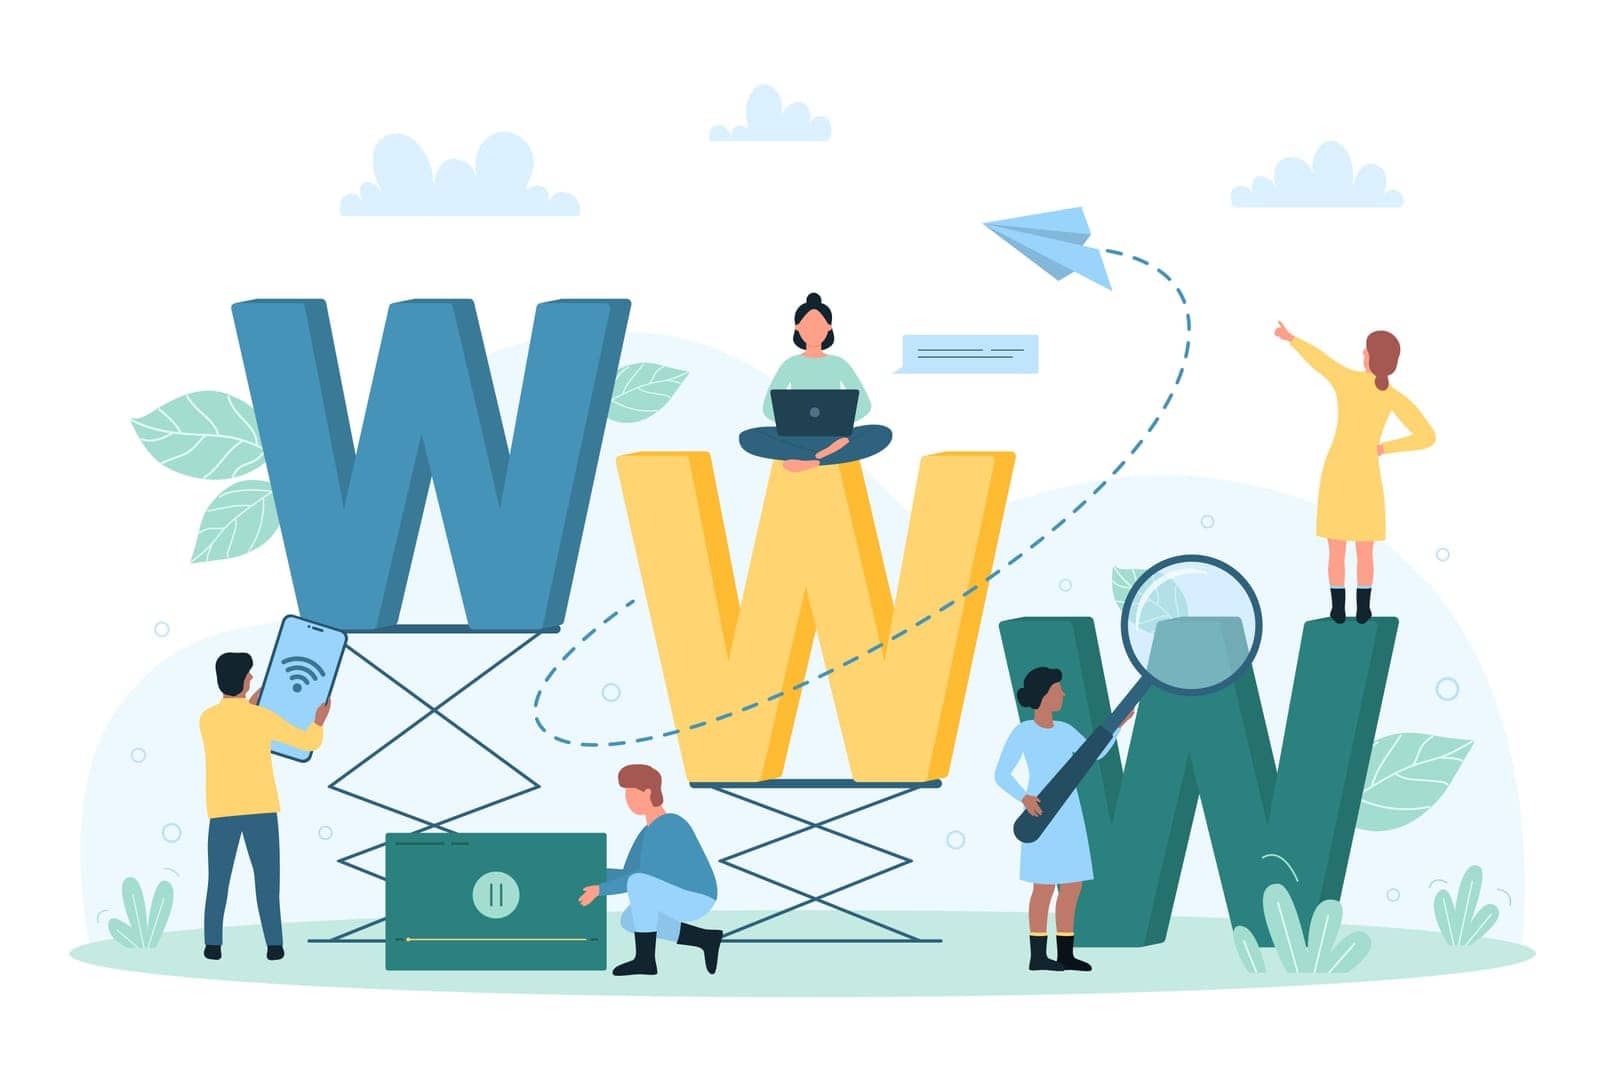 Information search in web or www browsing vector illustration. Cartoon tiny people look through magnifying glass at WWW lettering, using mobile phone, laptop to find and browse network address